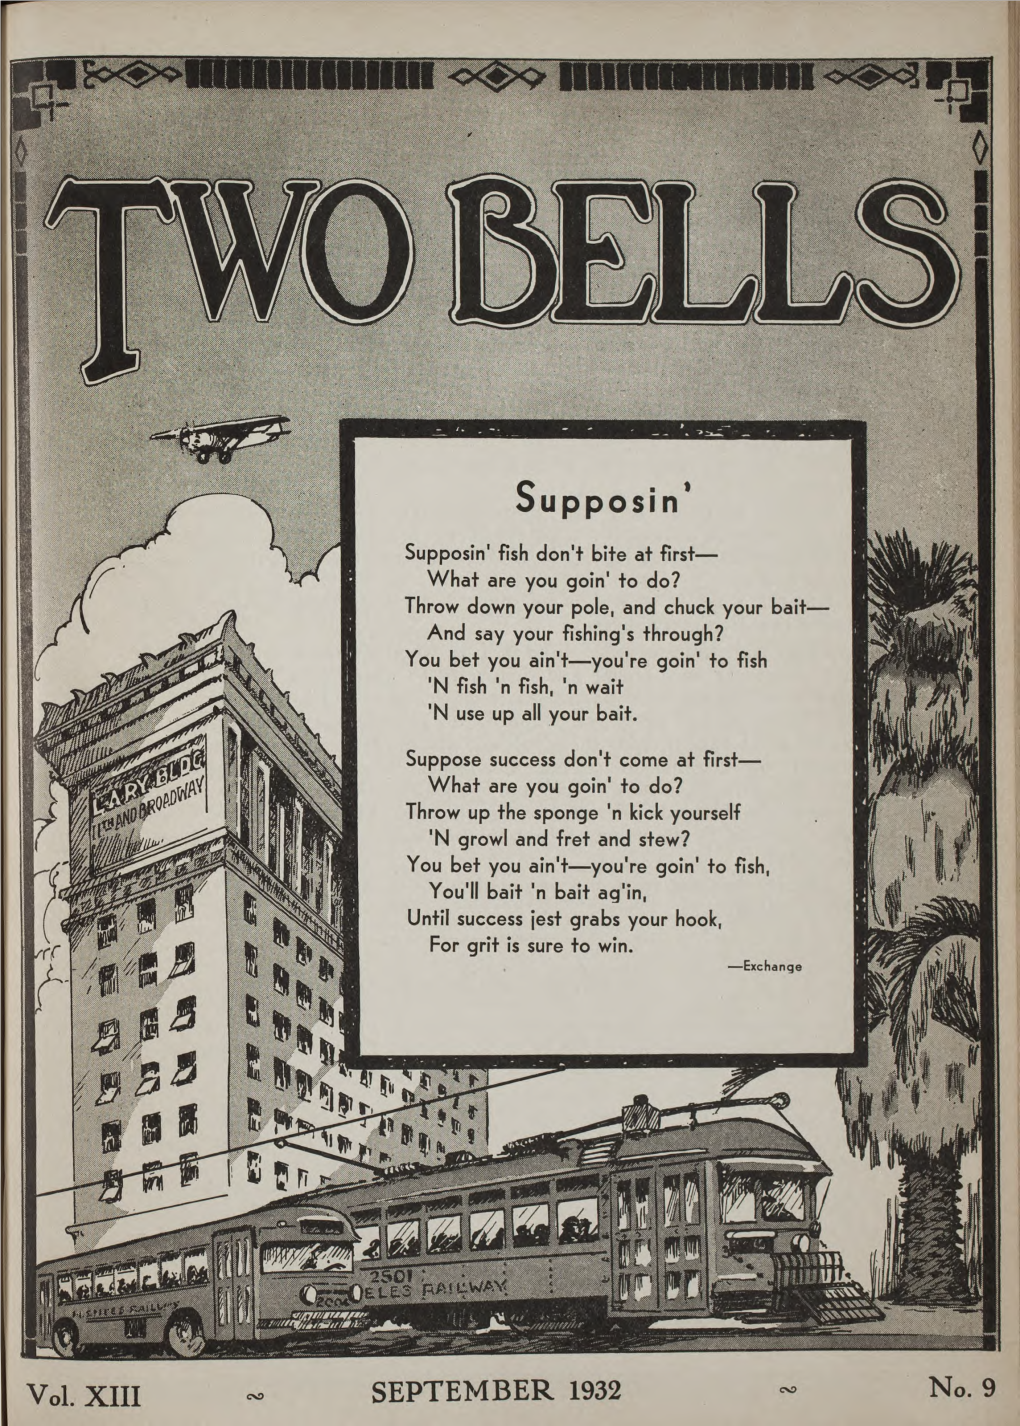 Two Bells, Brown Is Giving Page 9, Column 1, Contained These Instructions to Words: Mr